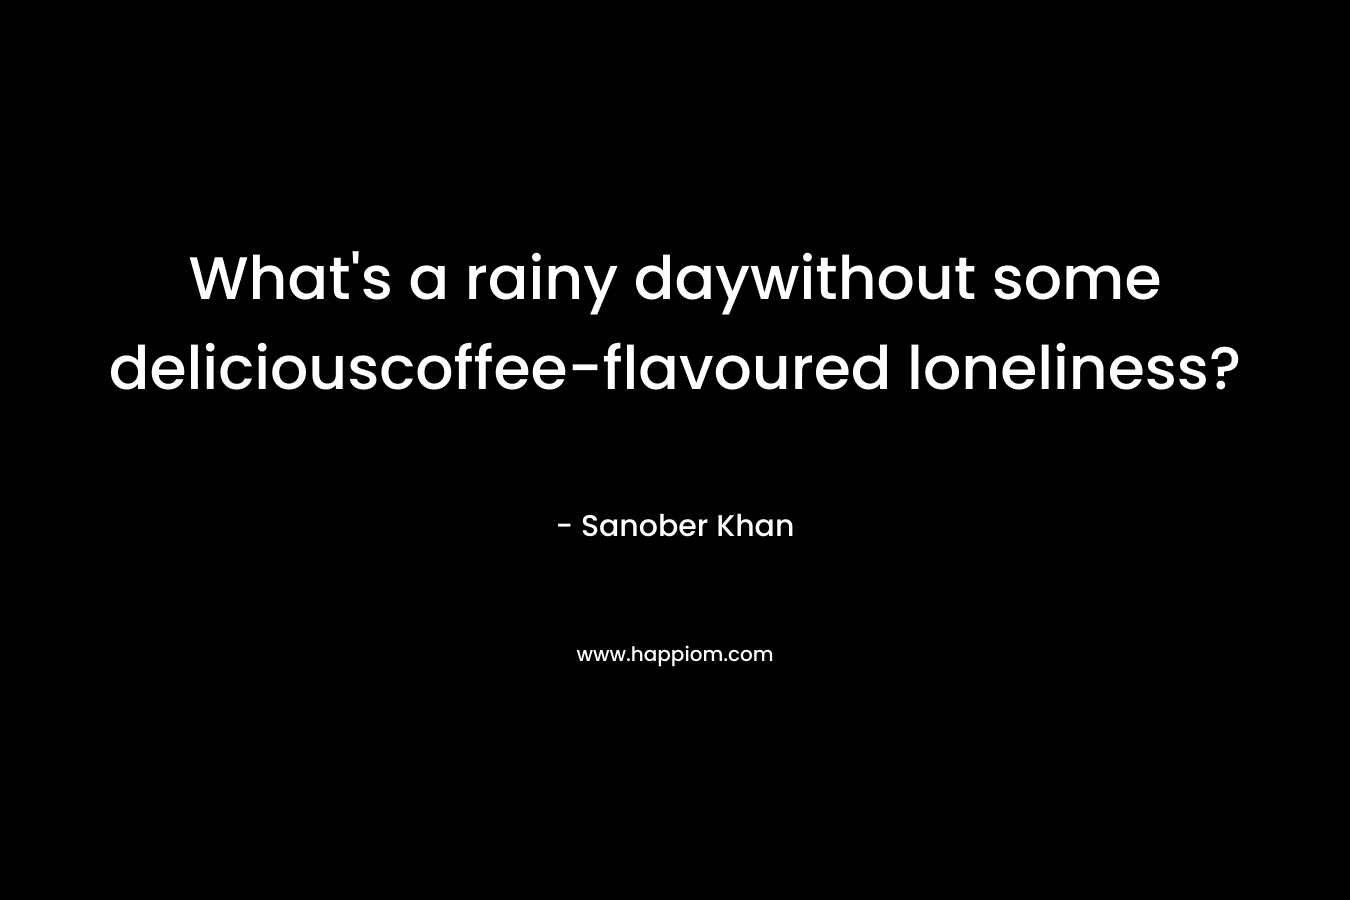 What's a rainy daywithout some deliciouscoffee-flavoured loneliness?